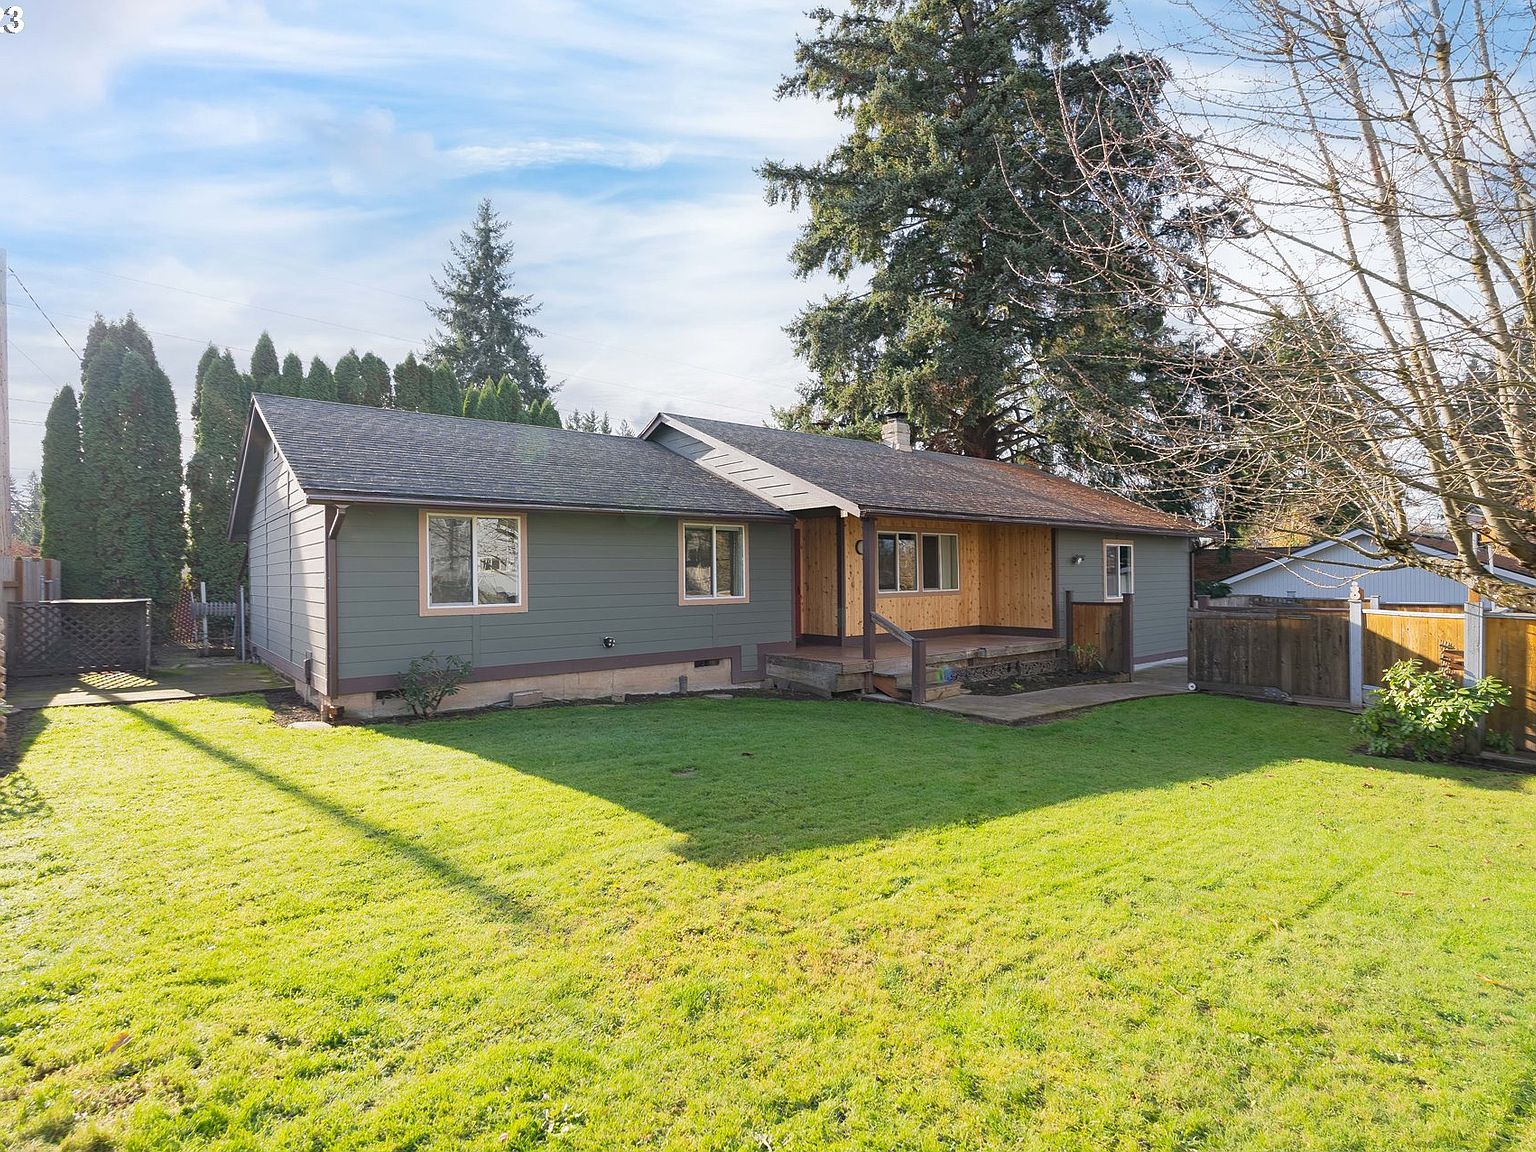 9908 NW 4th Ave, Vancouver, WA 98685 | Zillow